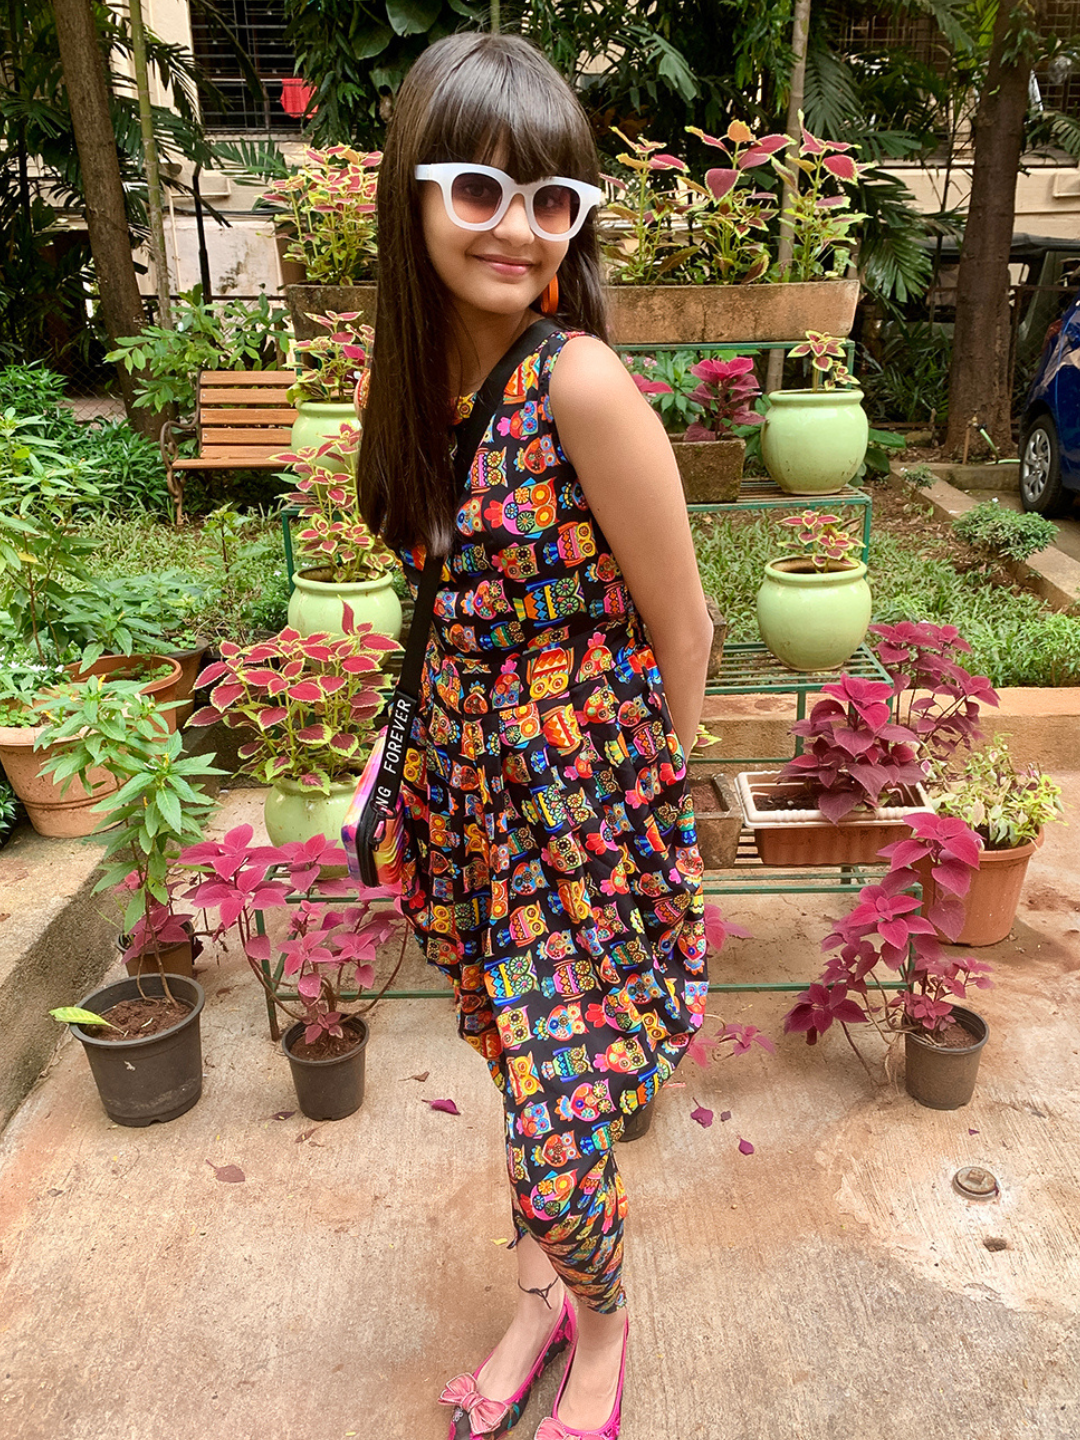 Printed Elasticated Dhoti Jumpsuit for Girls - Uptownie